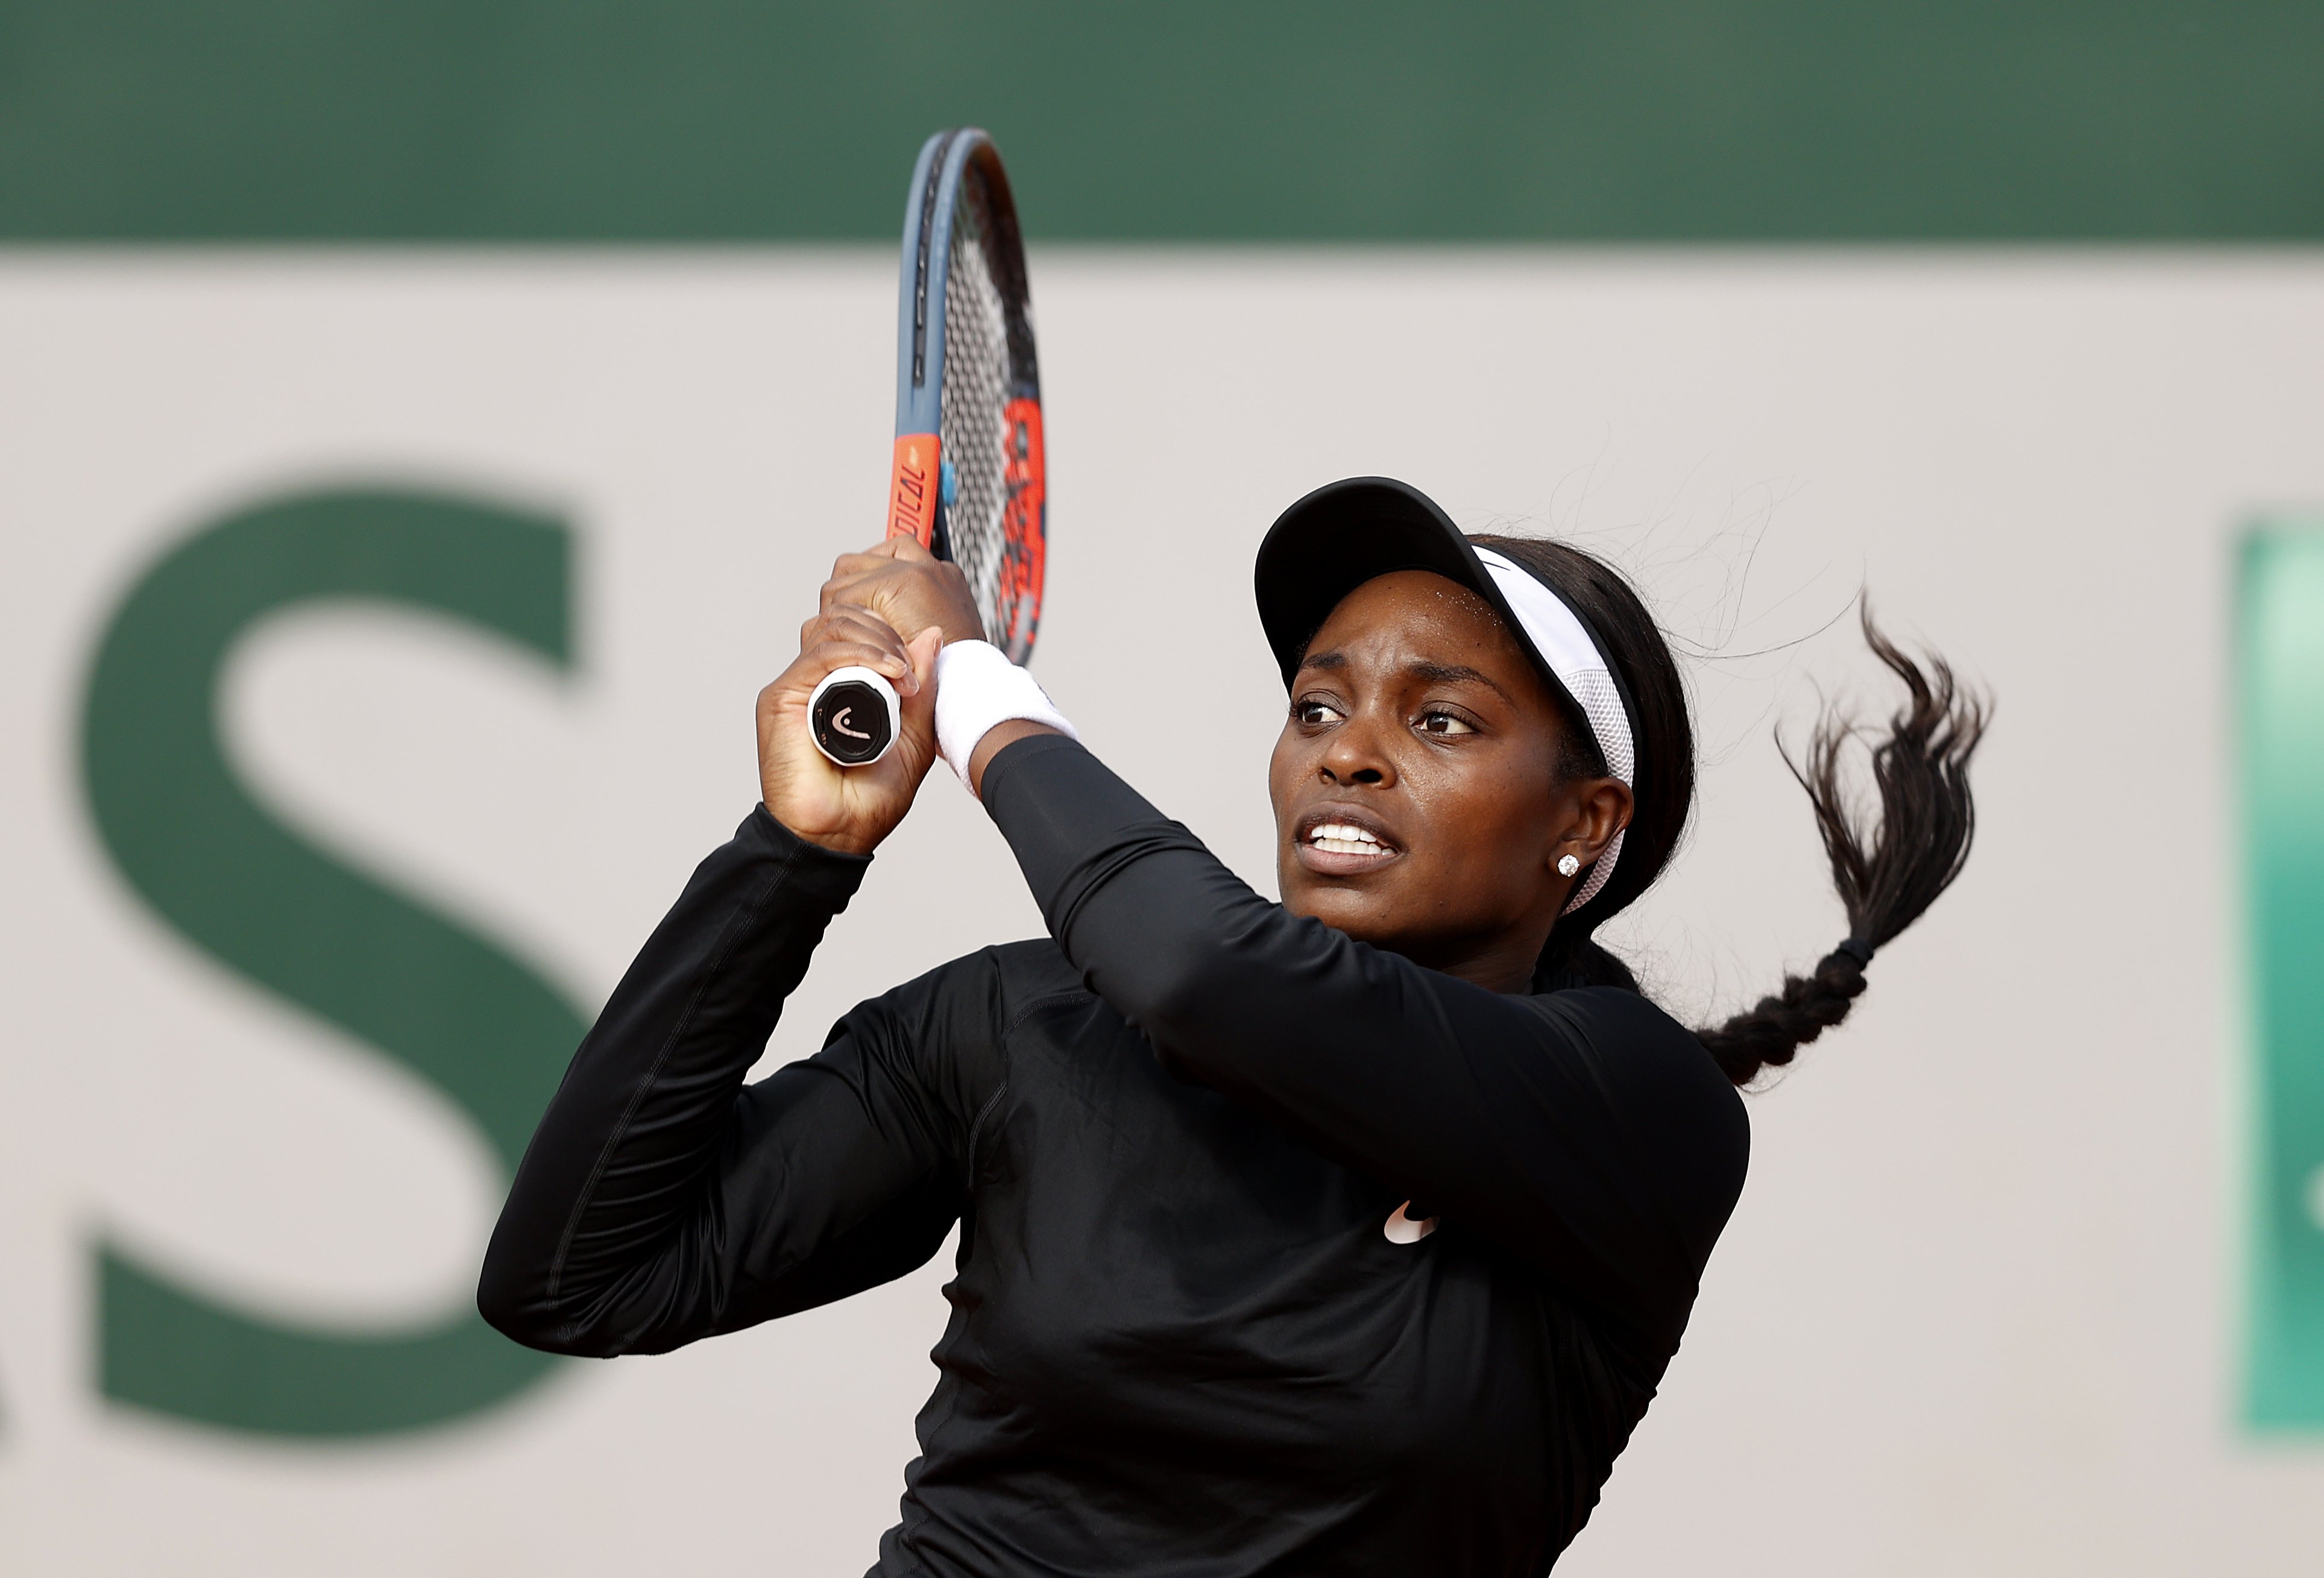 Sloane Stephens pictured at the 2020 French Open at Roland Garros on October 01, 2020 in Paris, France. | Source: Getty Images